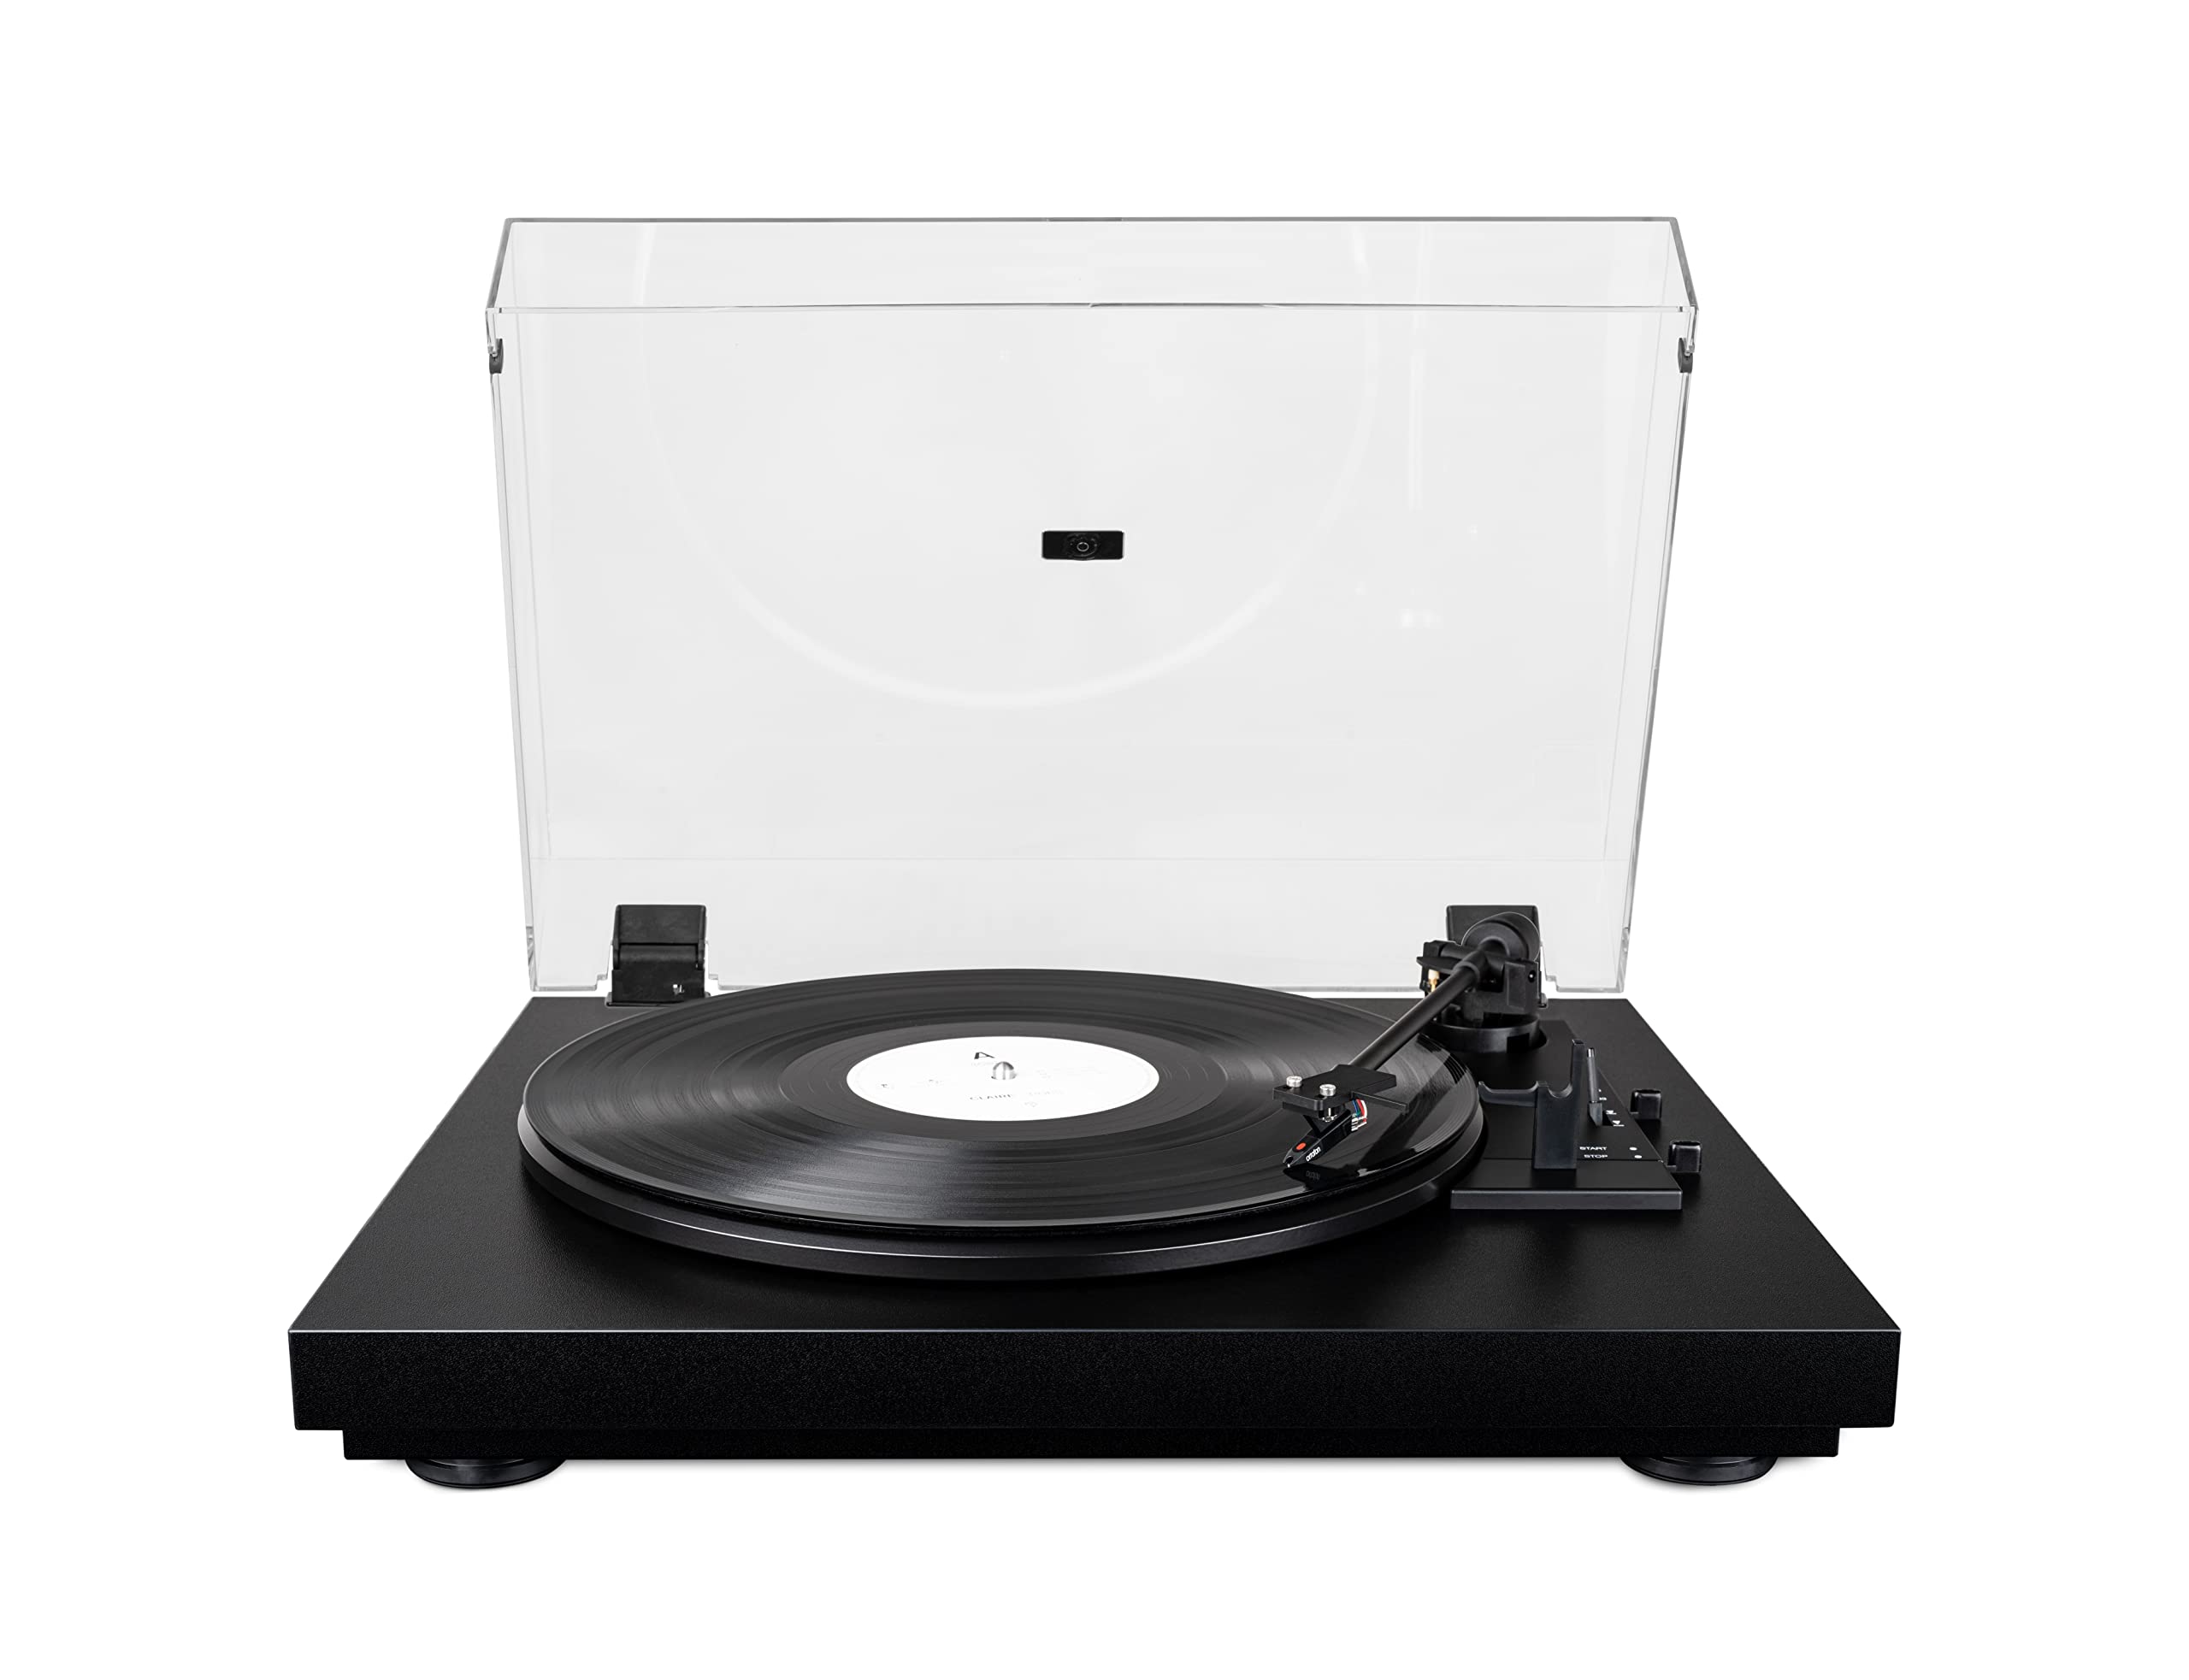 Pro-Ject Audio Systems 